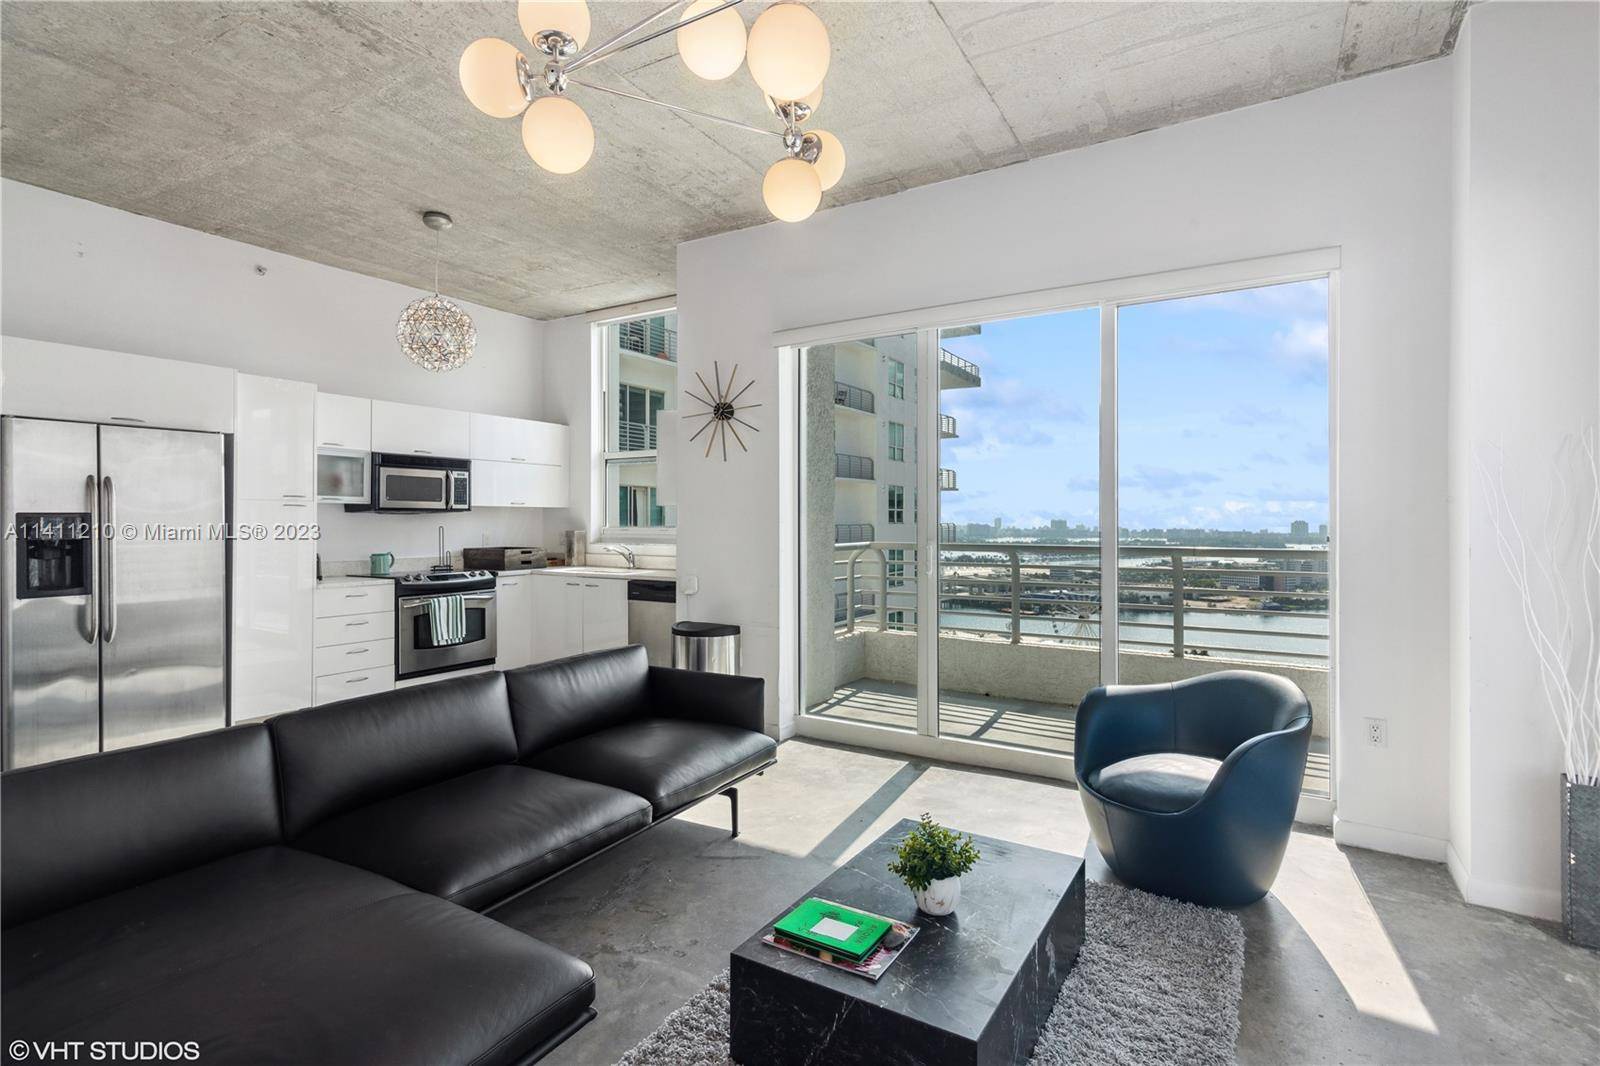 Located in the heart of Miami, Loft Downtown 2 is a contemporary condo that provides easy access to a plethora of shopping, dining, and entertainment options.